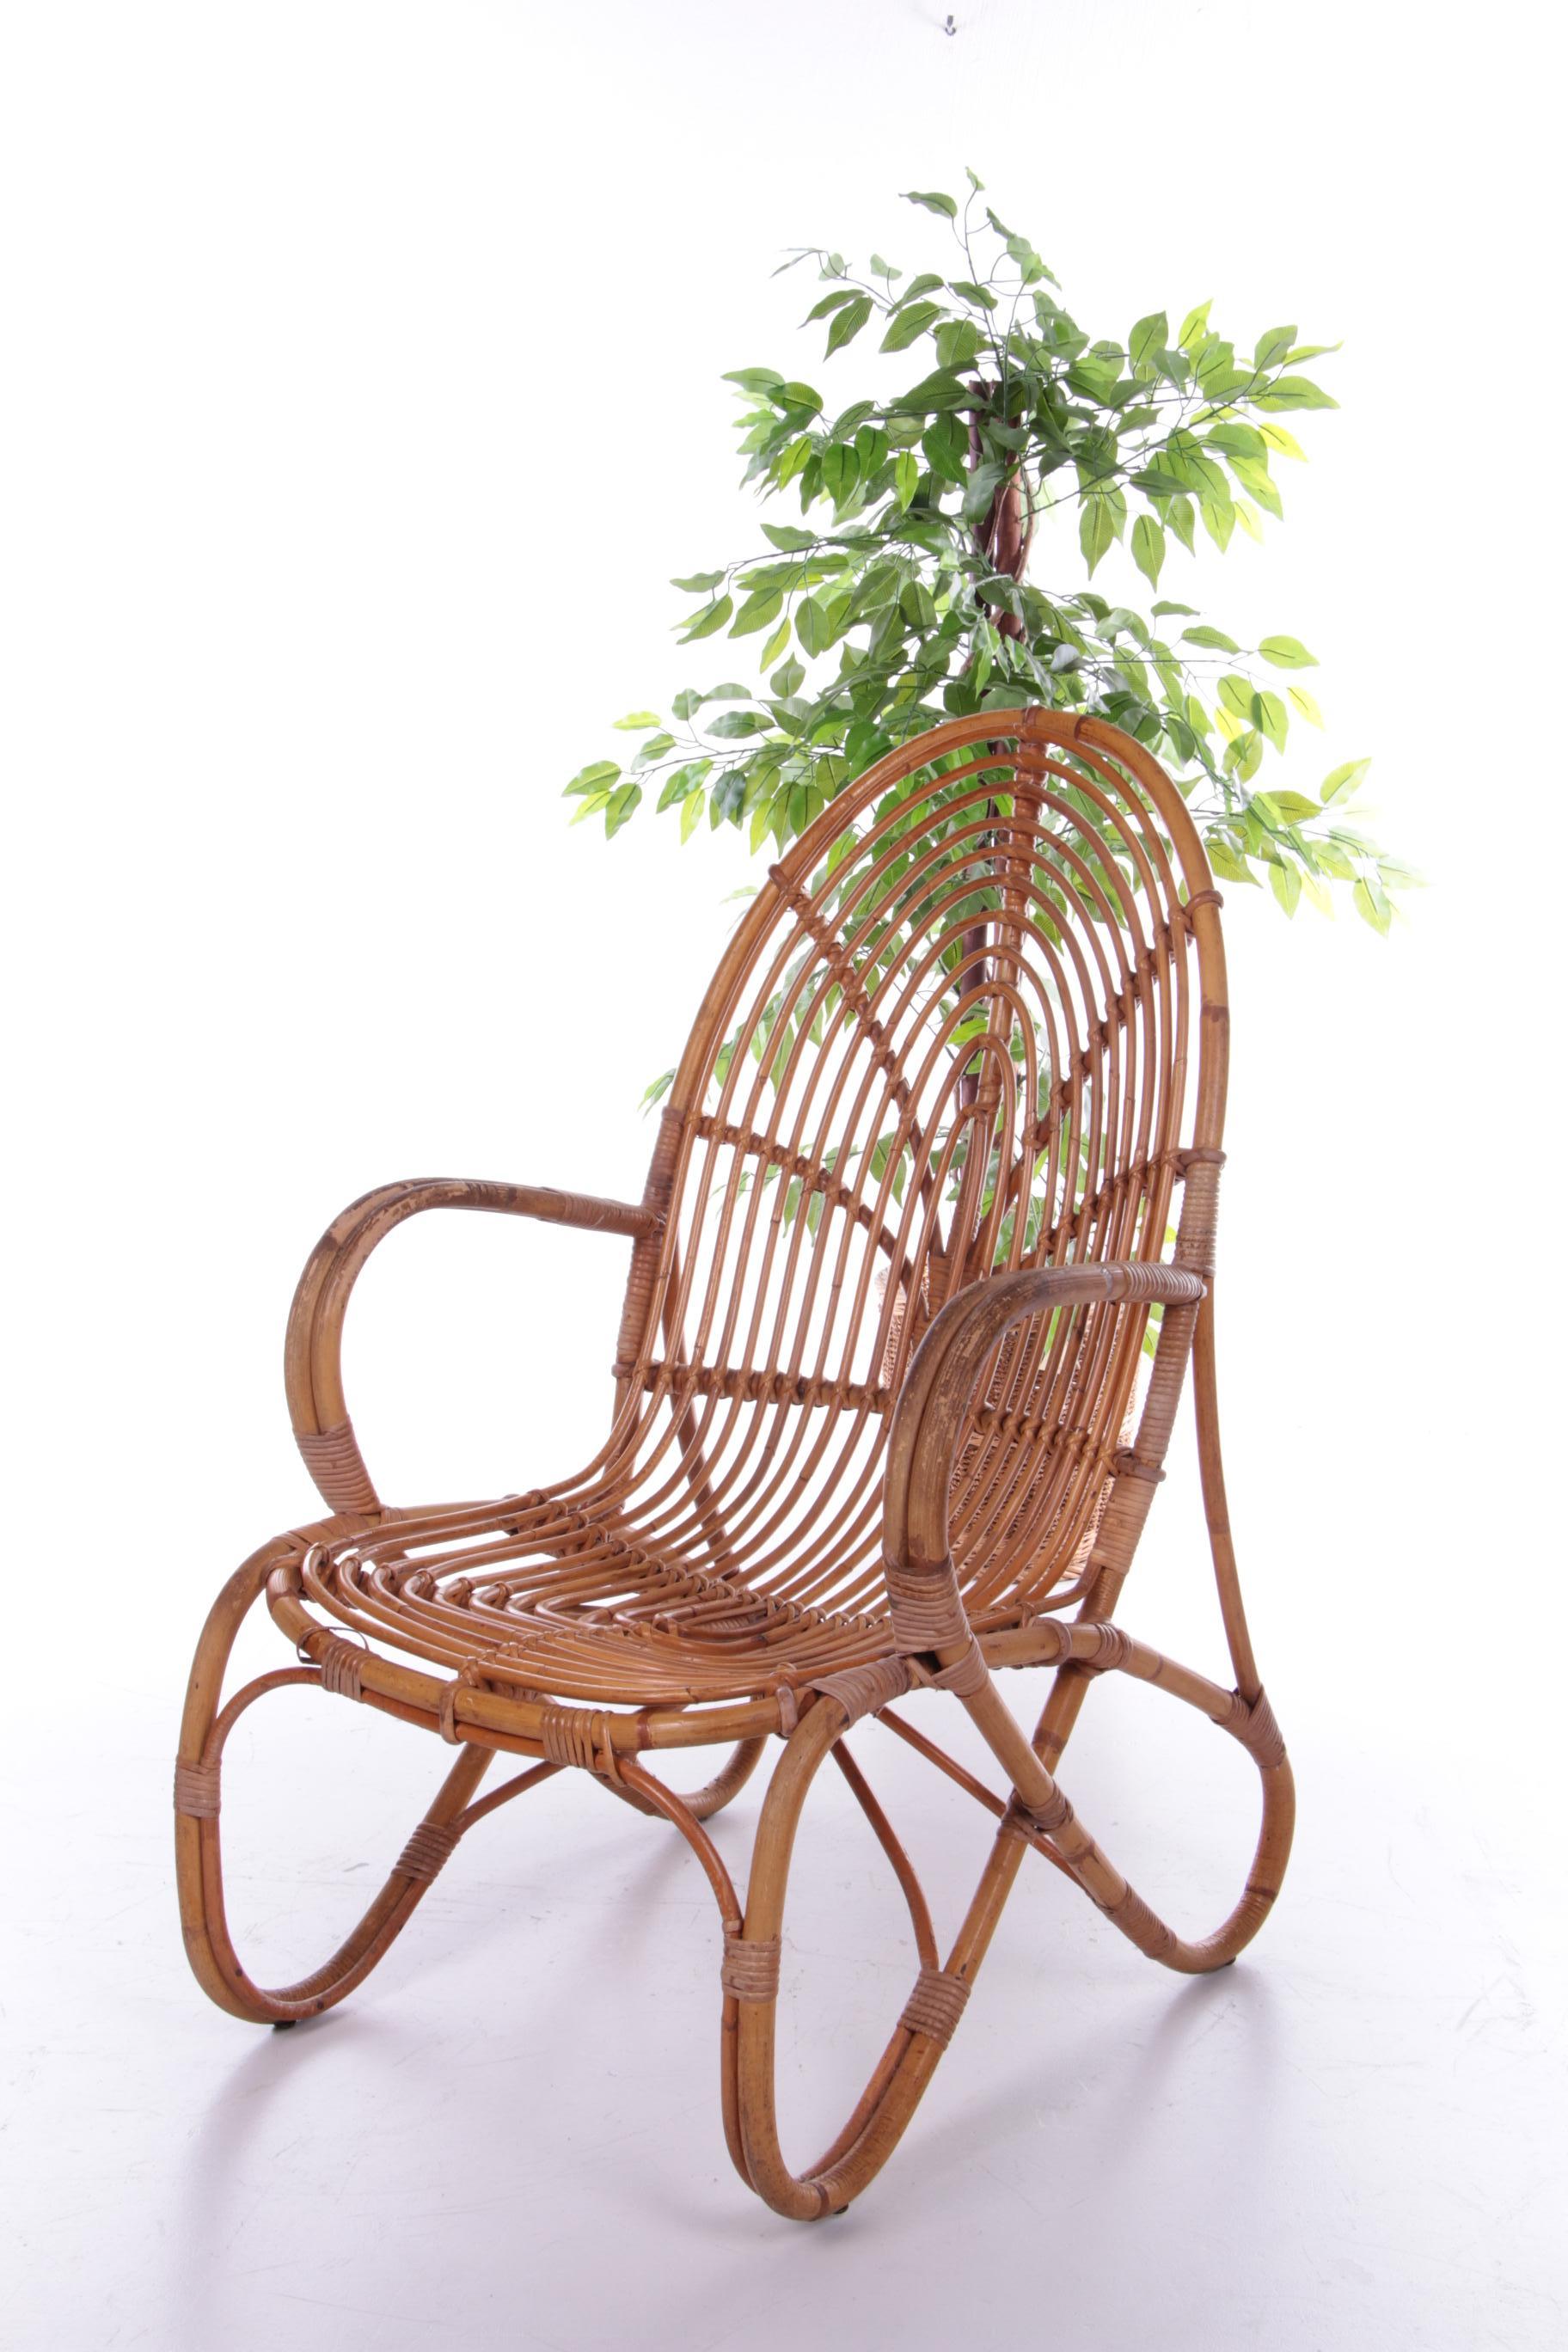 Vintage Dutch design rattan lounge chair Rohe Noordwolde

The sun comes out again, ideal to restyle your living room or garden room with this unique rattan chair. Manufacturer: Rohe Noordwolde. Period: 1960s. Due to its beautiful organic design